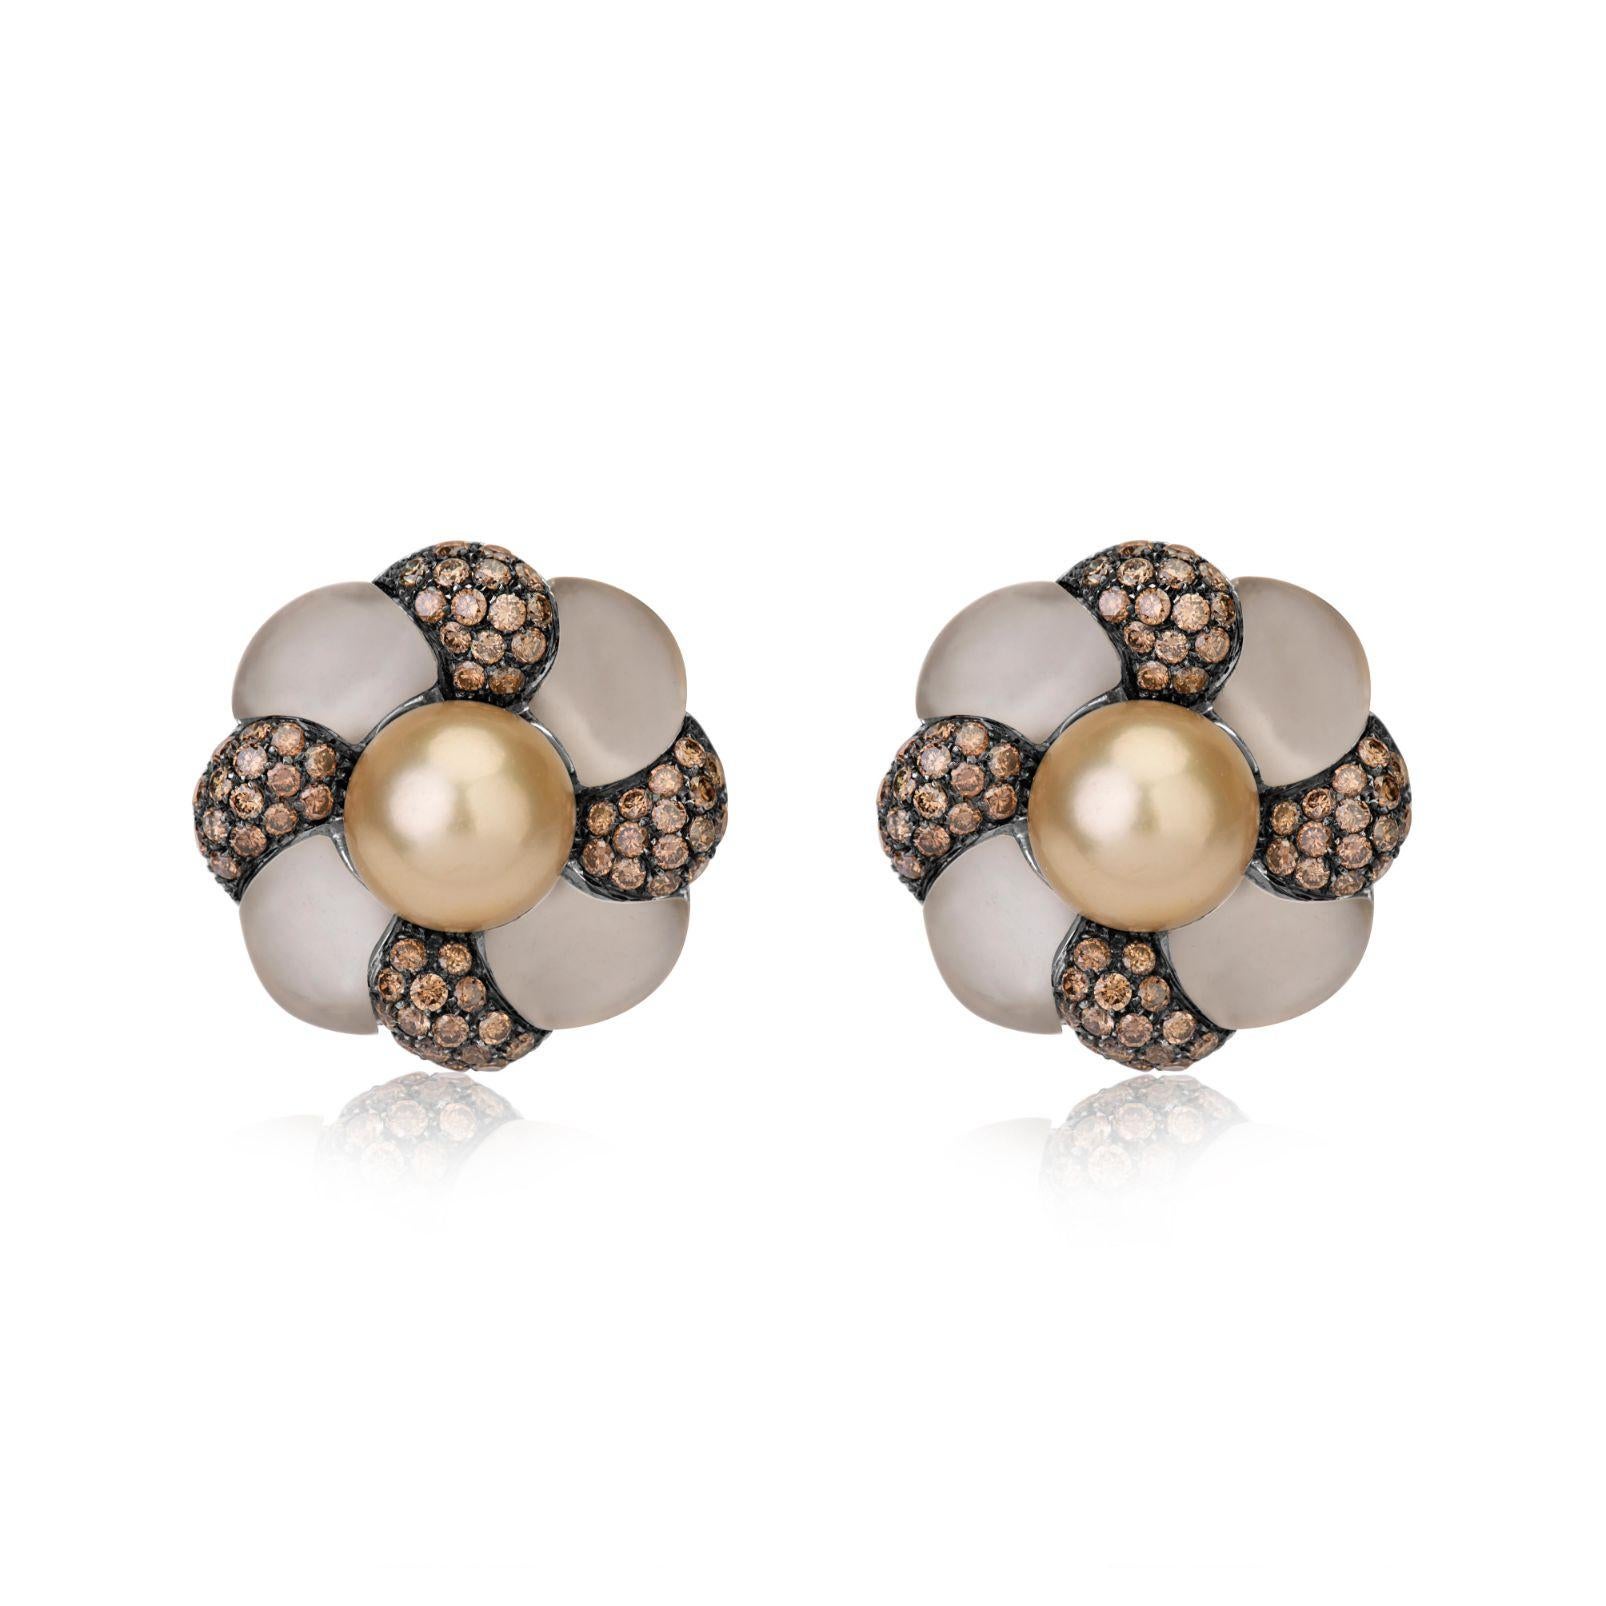 Contemporary Andreoli Brown Diamond Rock Crystal Golden Pearl 18 Karat Yellow Gold Earrings For Sale